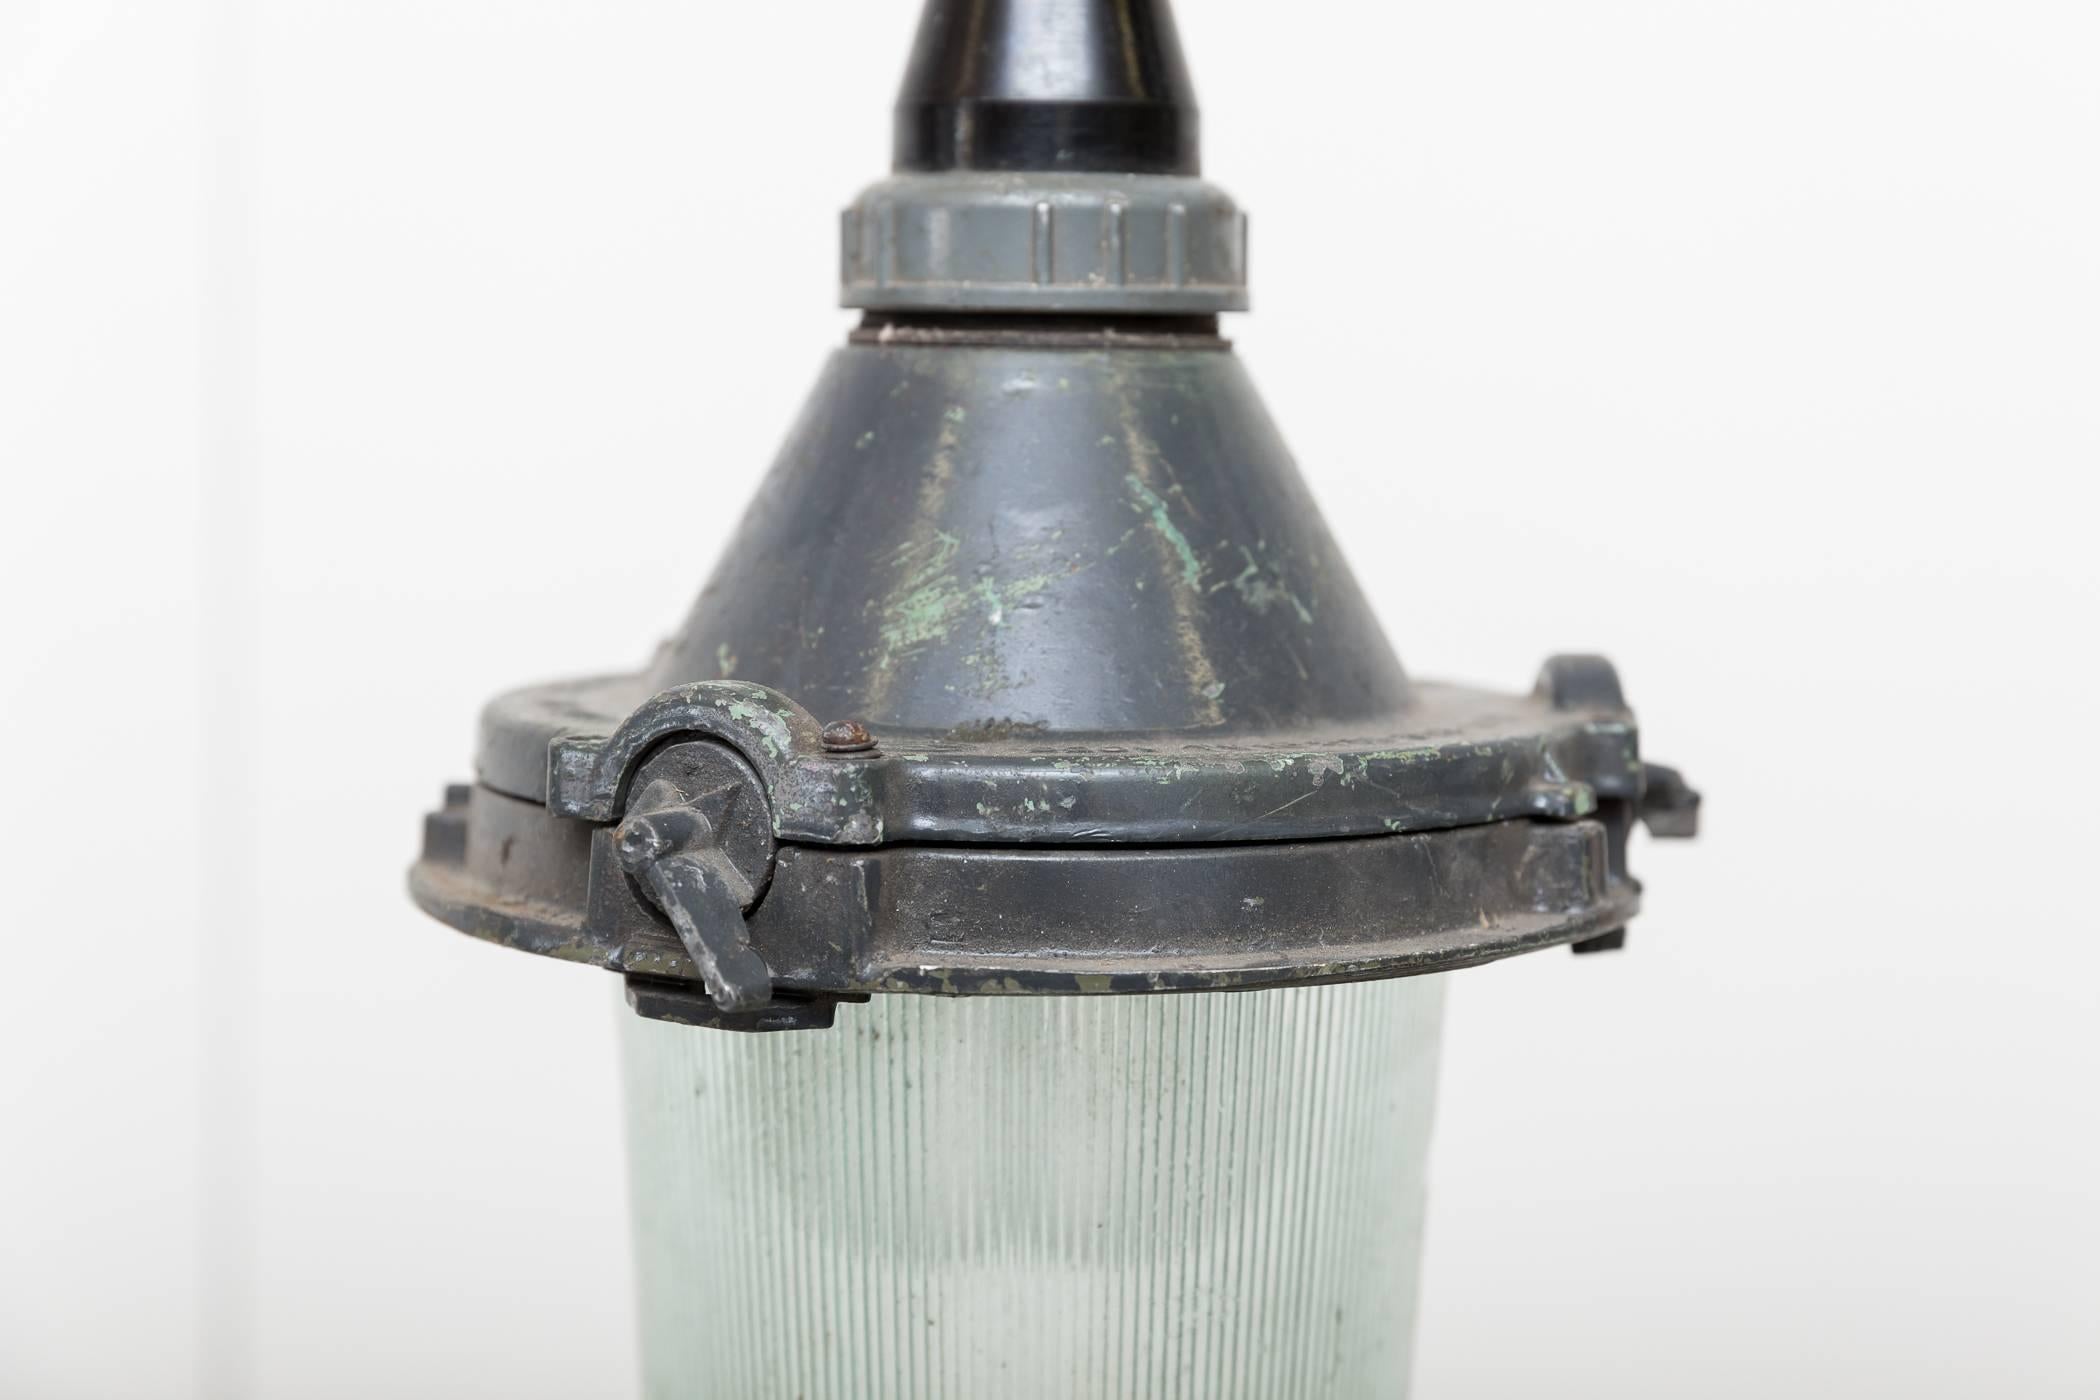 Dutch Vintage European Glass and Metal Factory Lamps